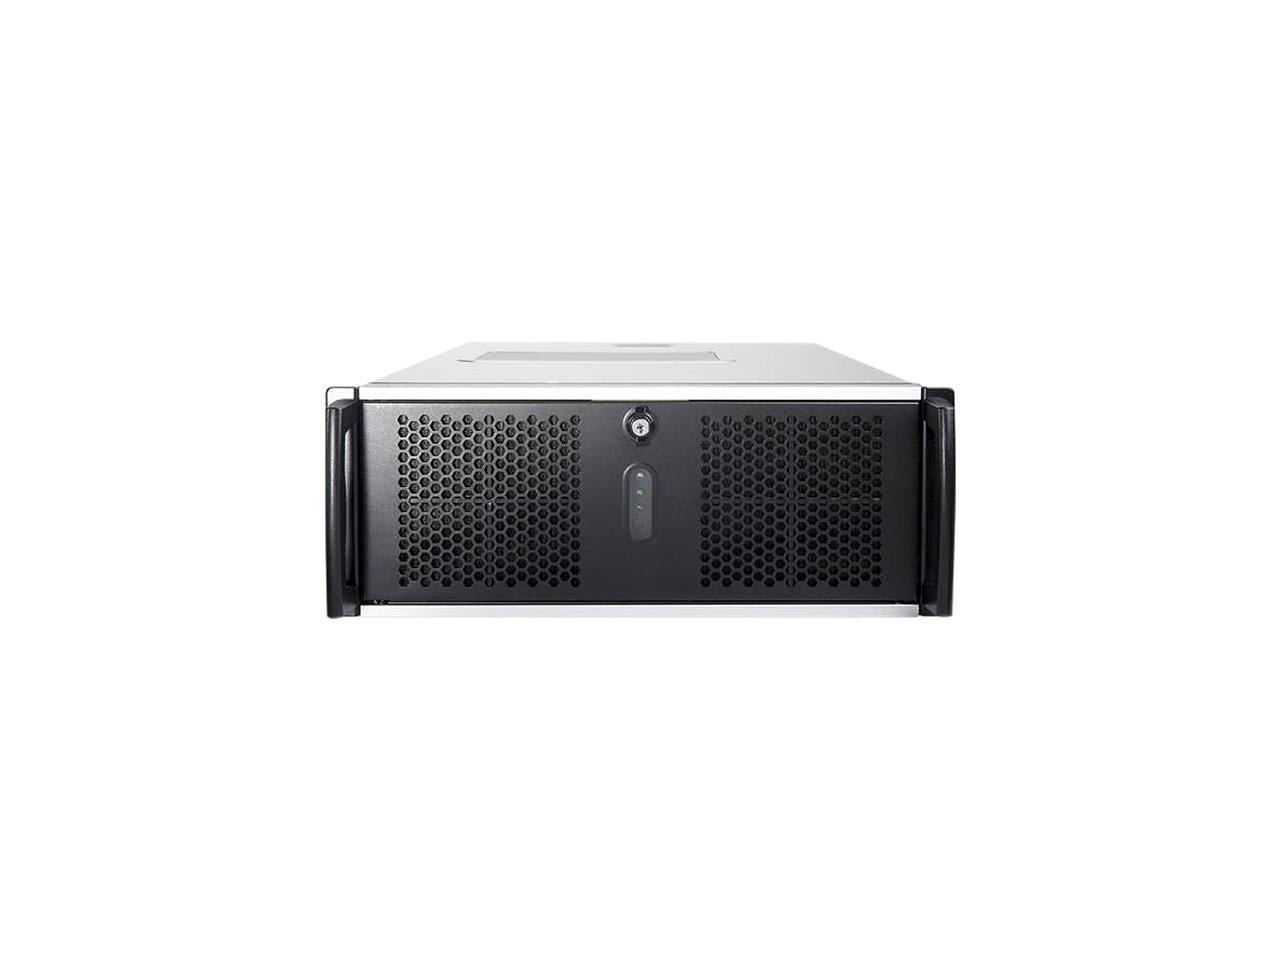 Chenbro Rackmount Chassis - Rack-Mountable - Atx;Ceb;Micro Atx - Front Control Power On/